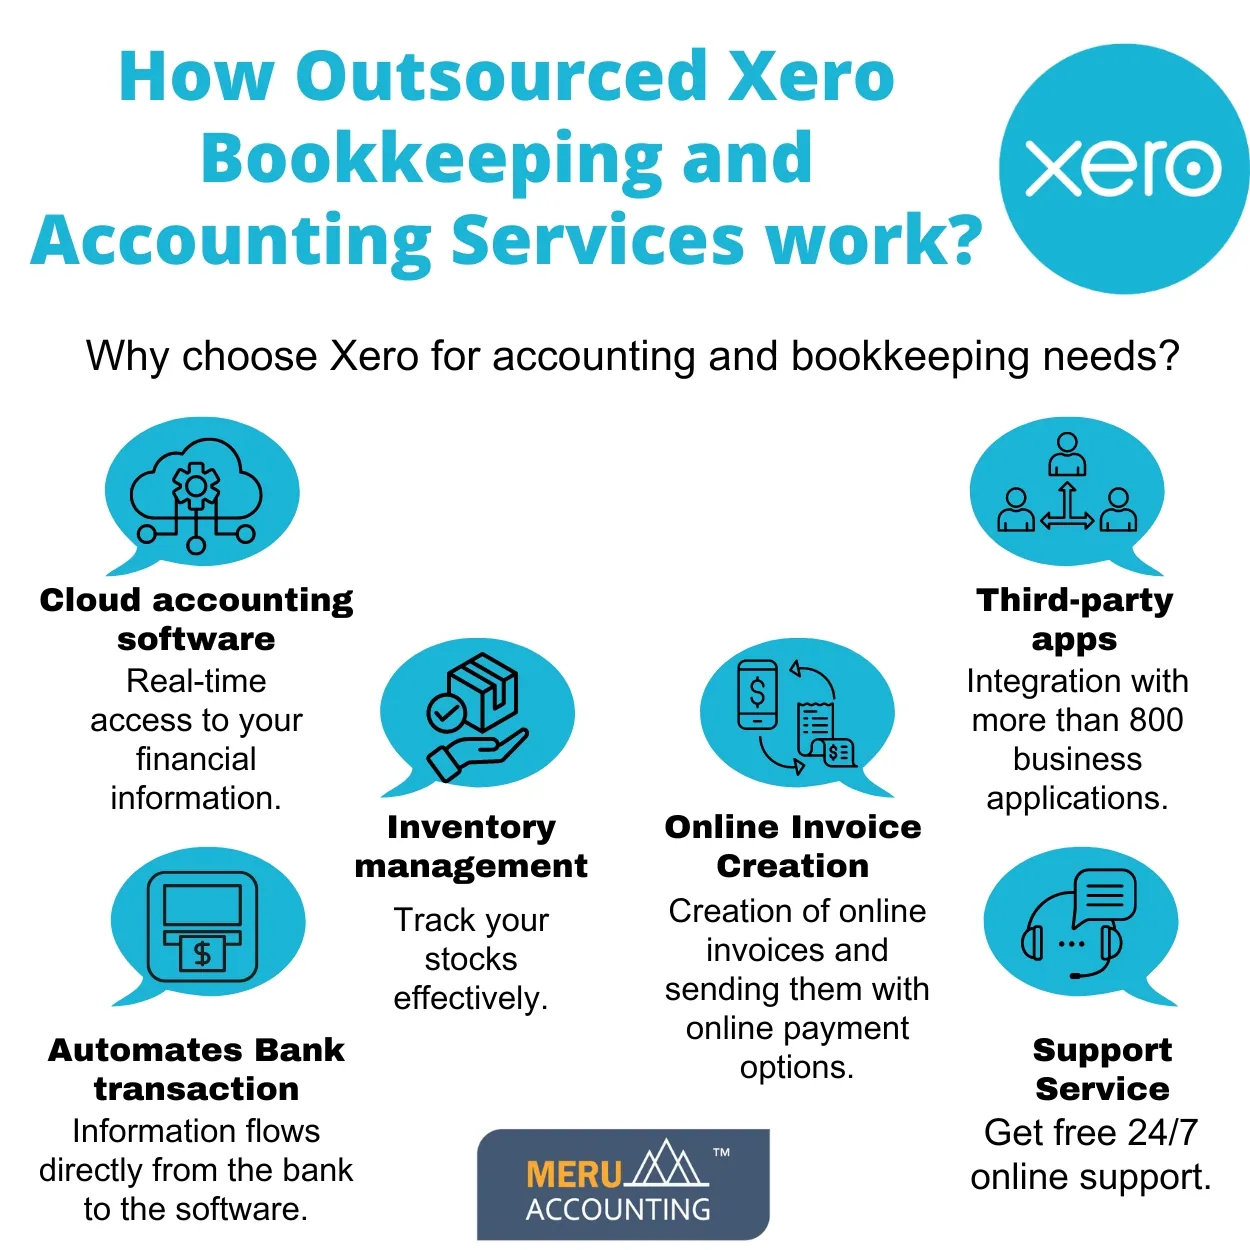 outsourced Xero Accounting Services